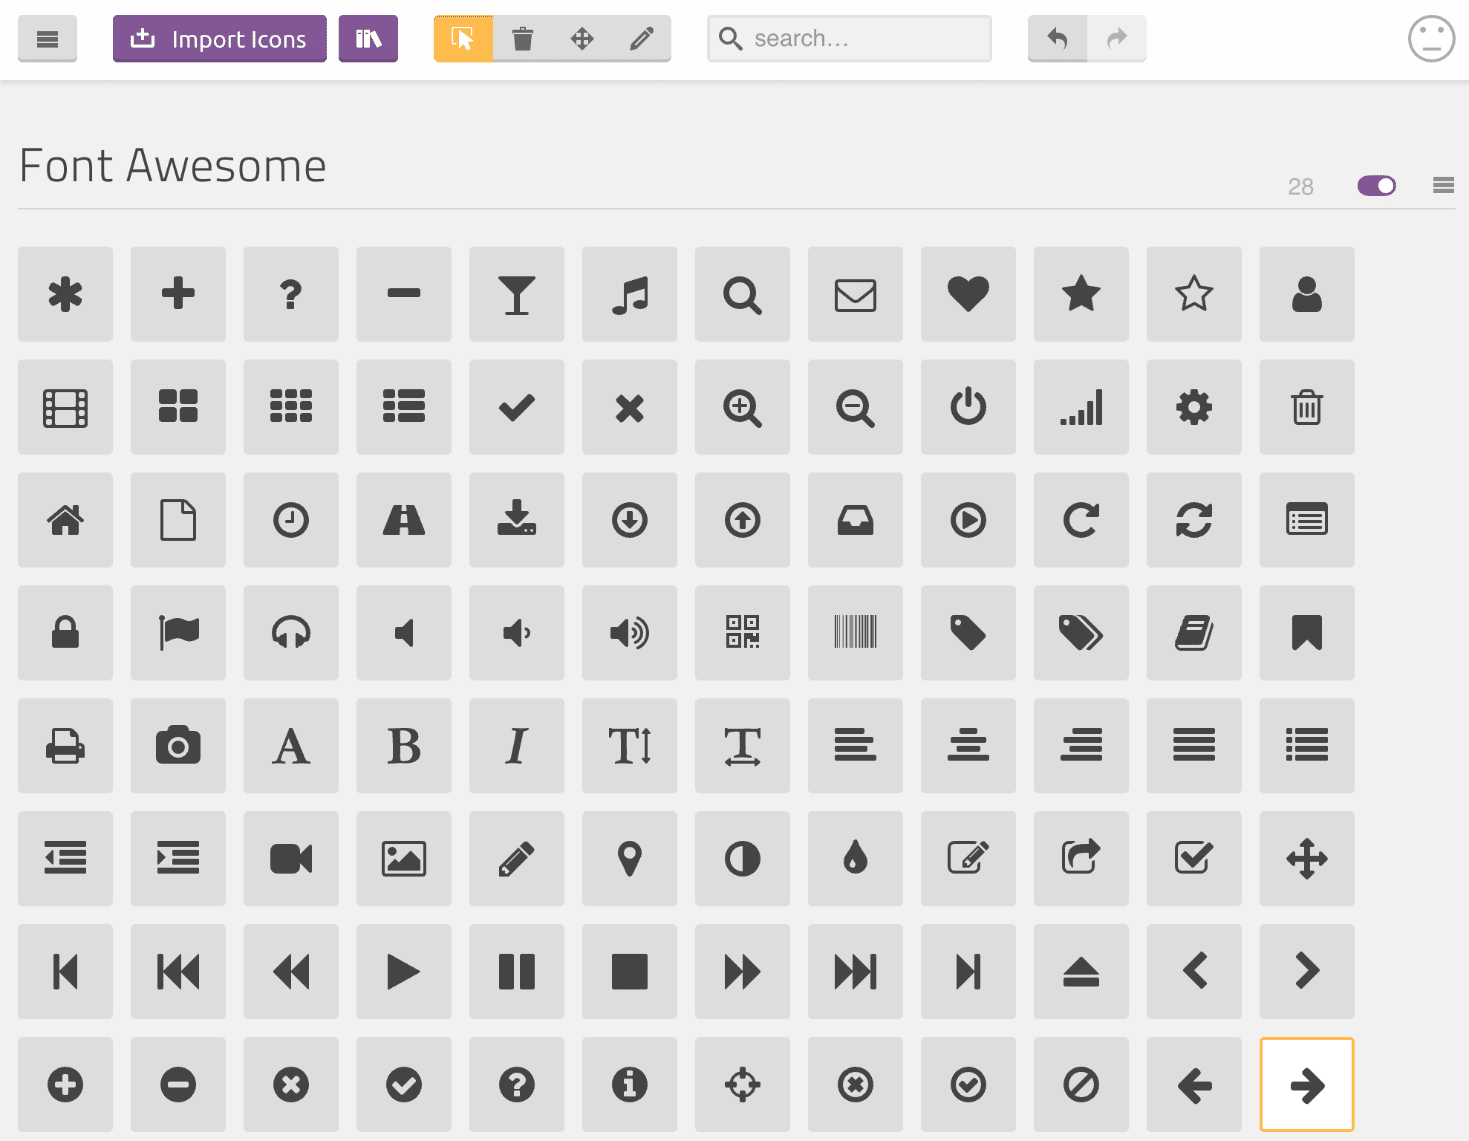 Choose Font Awesome icons